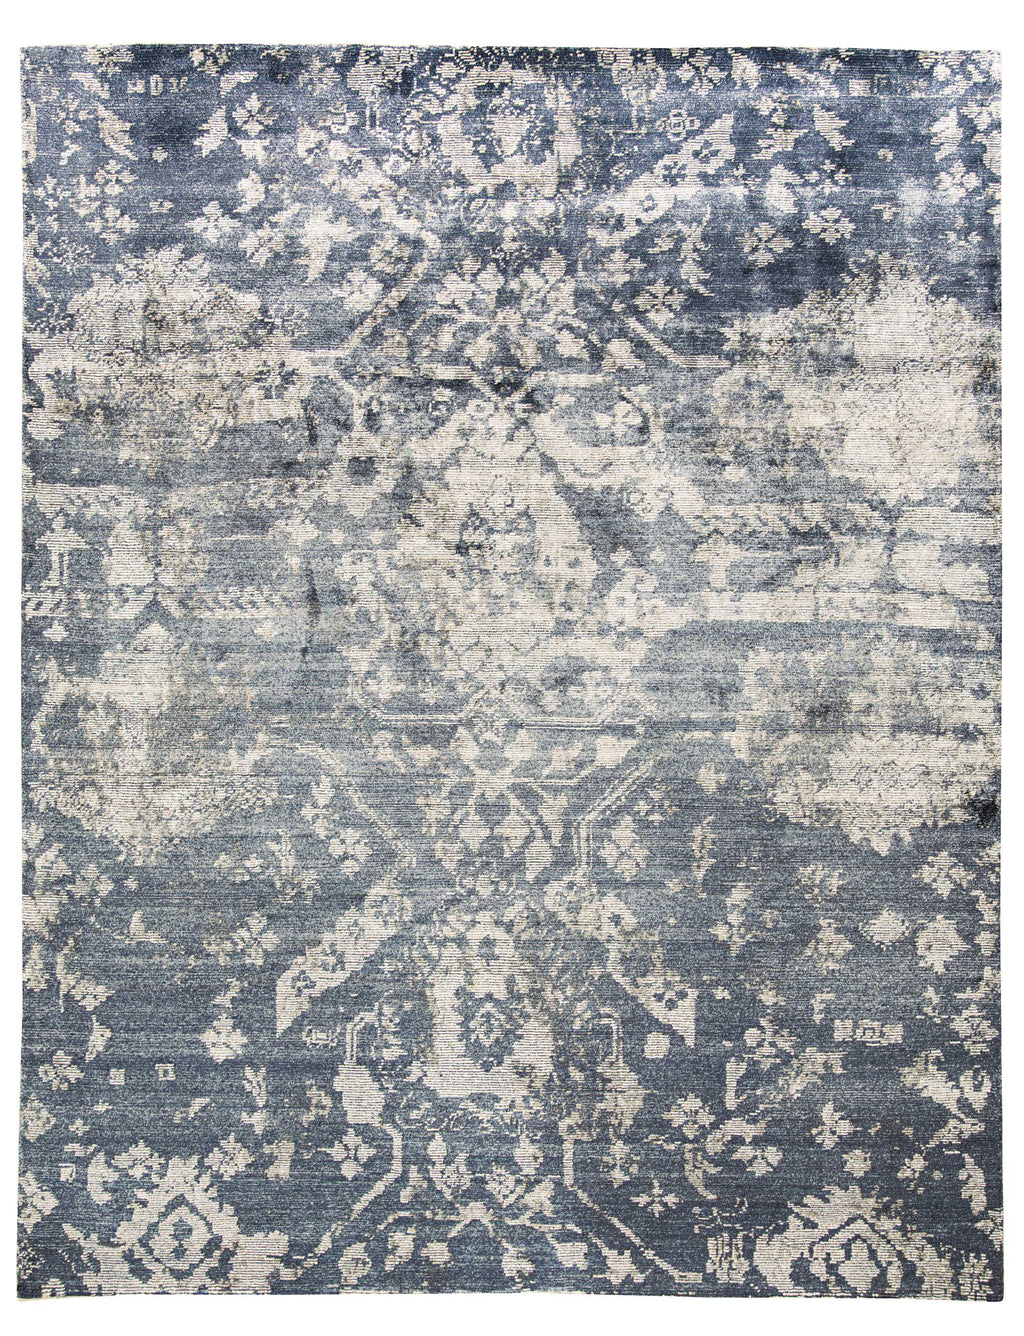 Vintage-style rectangular area rug with traditional Persian motifs in blue and grey.